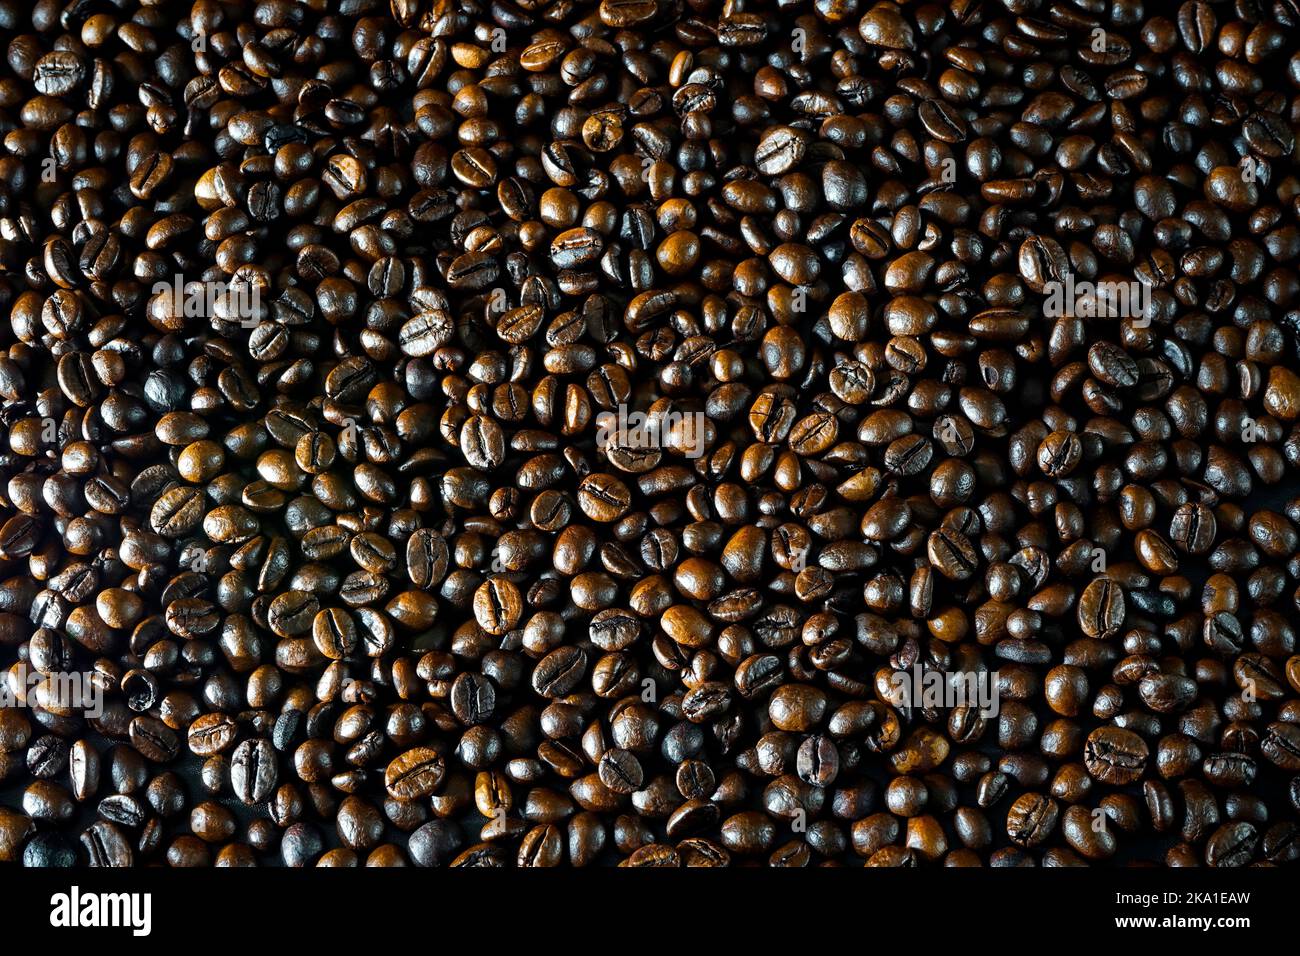 Indonesian Java coffee beans background wallpaper Stock Photo